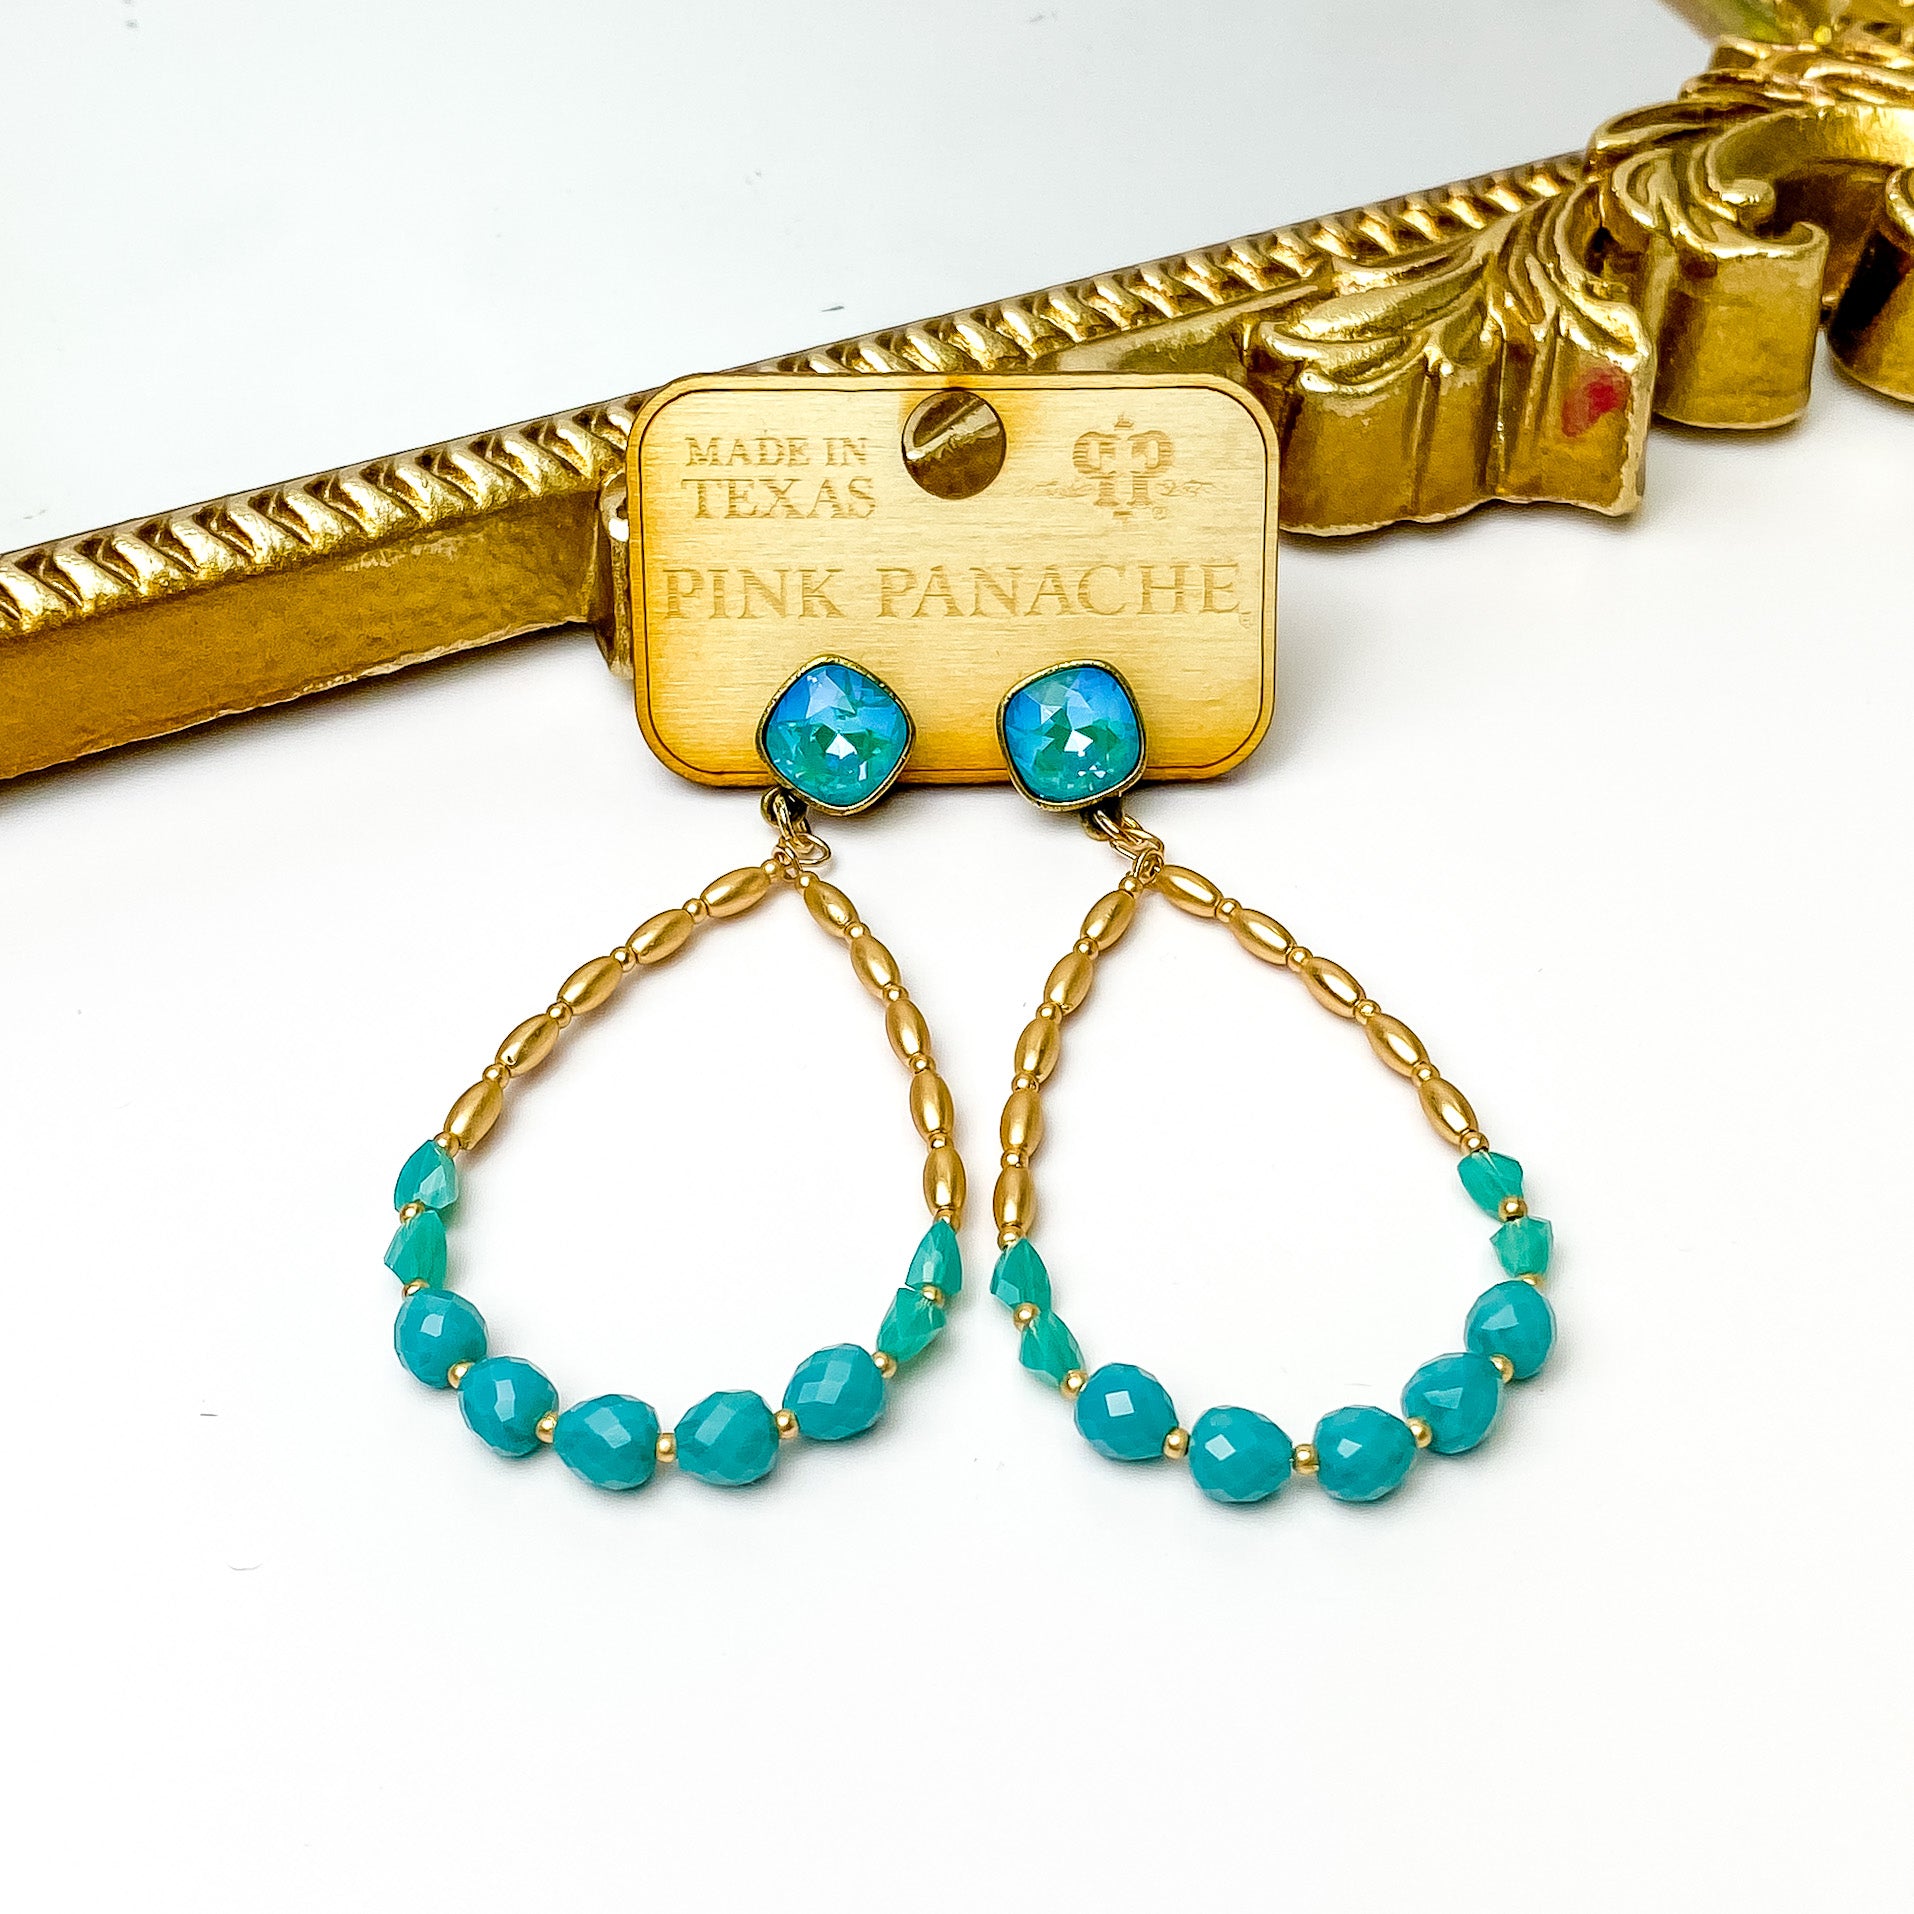 AB cushion cut post back earrings with a teardrop pendant. This pendant includes half gold beads and the bottom half has turquoise crystal beads with small gold spacers. These earrings are pictured on a wood earrings holder in front of a gold mirror on a white background. 